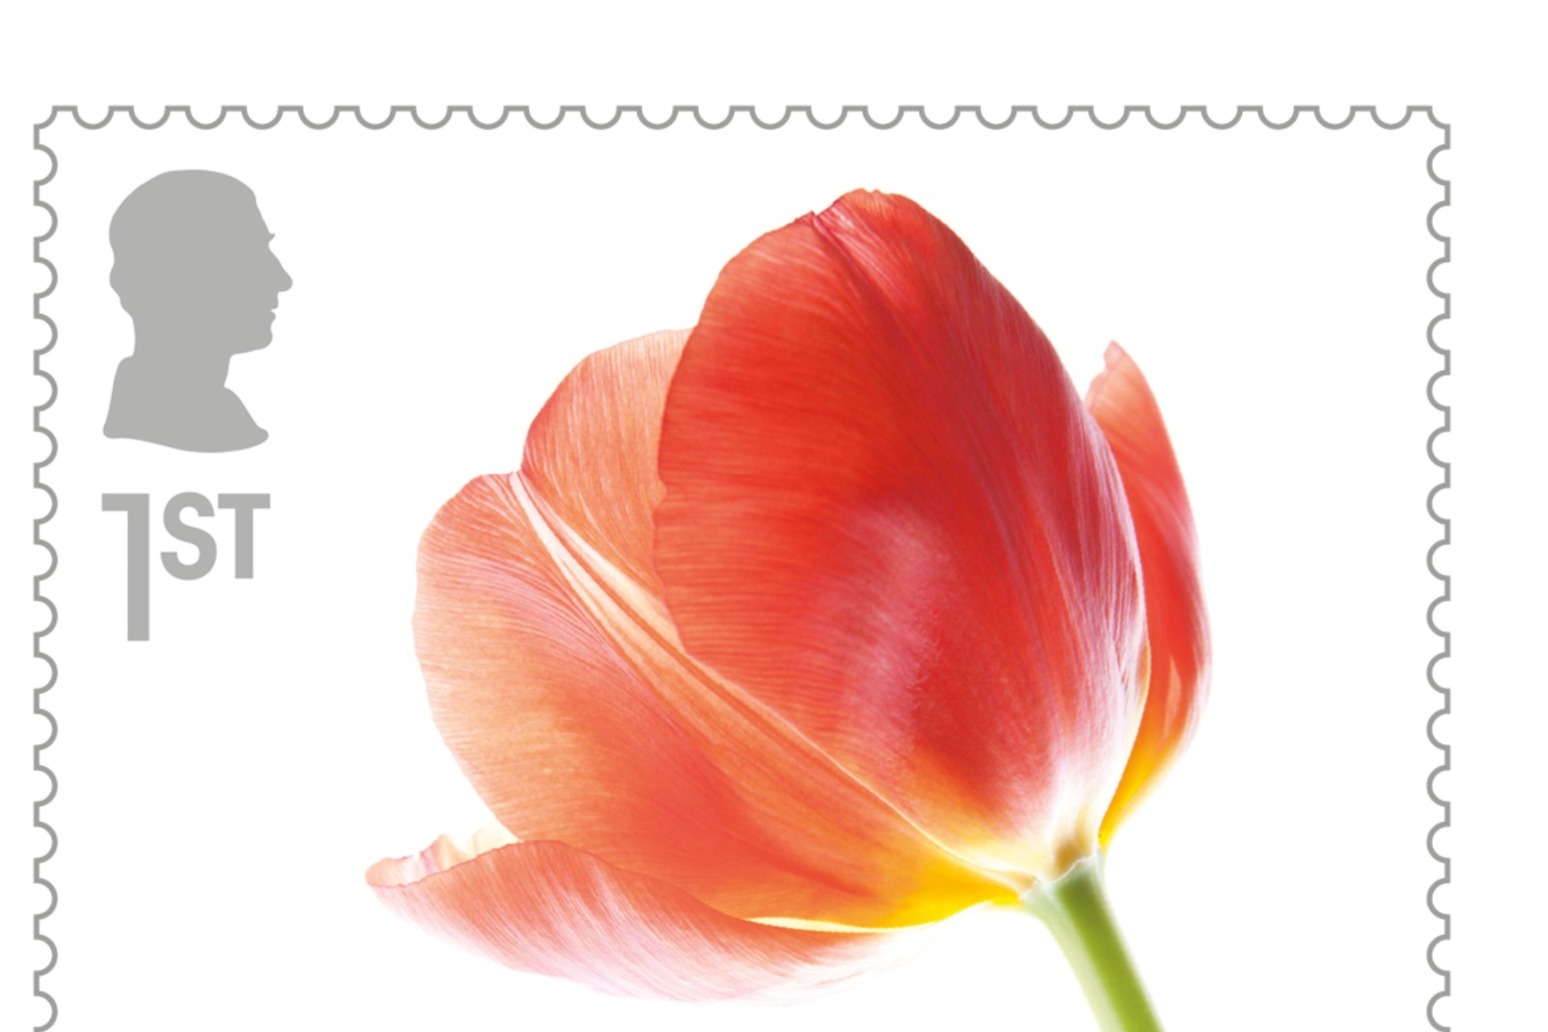 King’s silhouette appears on stamps for the first time 